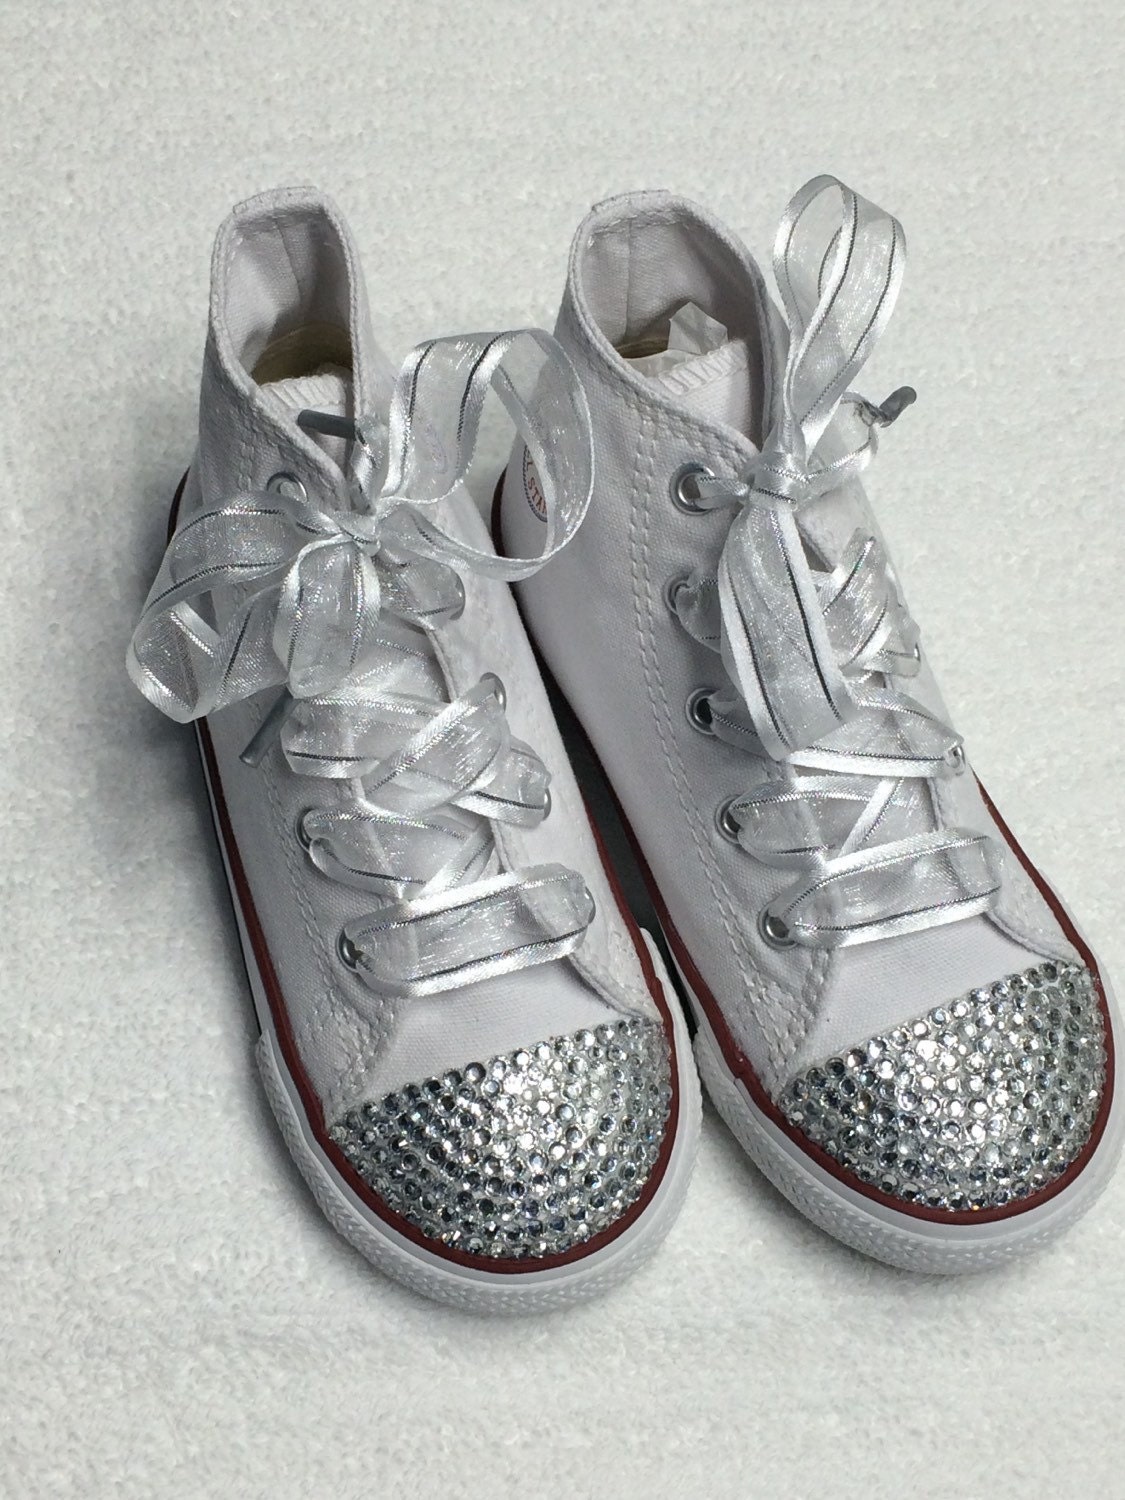 Women's High Top Blinged Out Converse Wedding by TrickedKicks